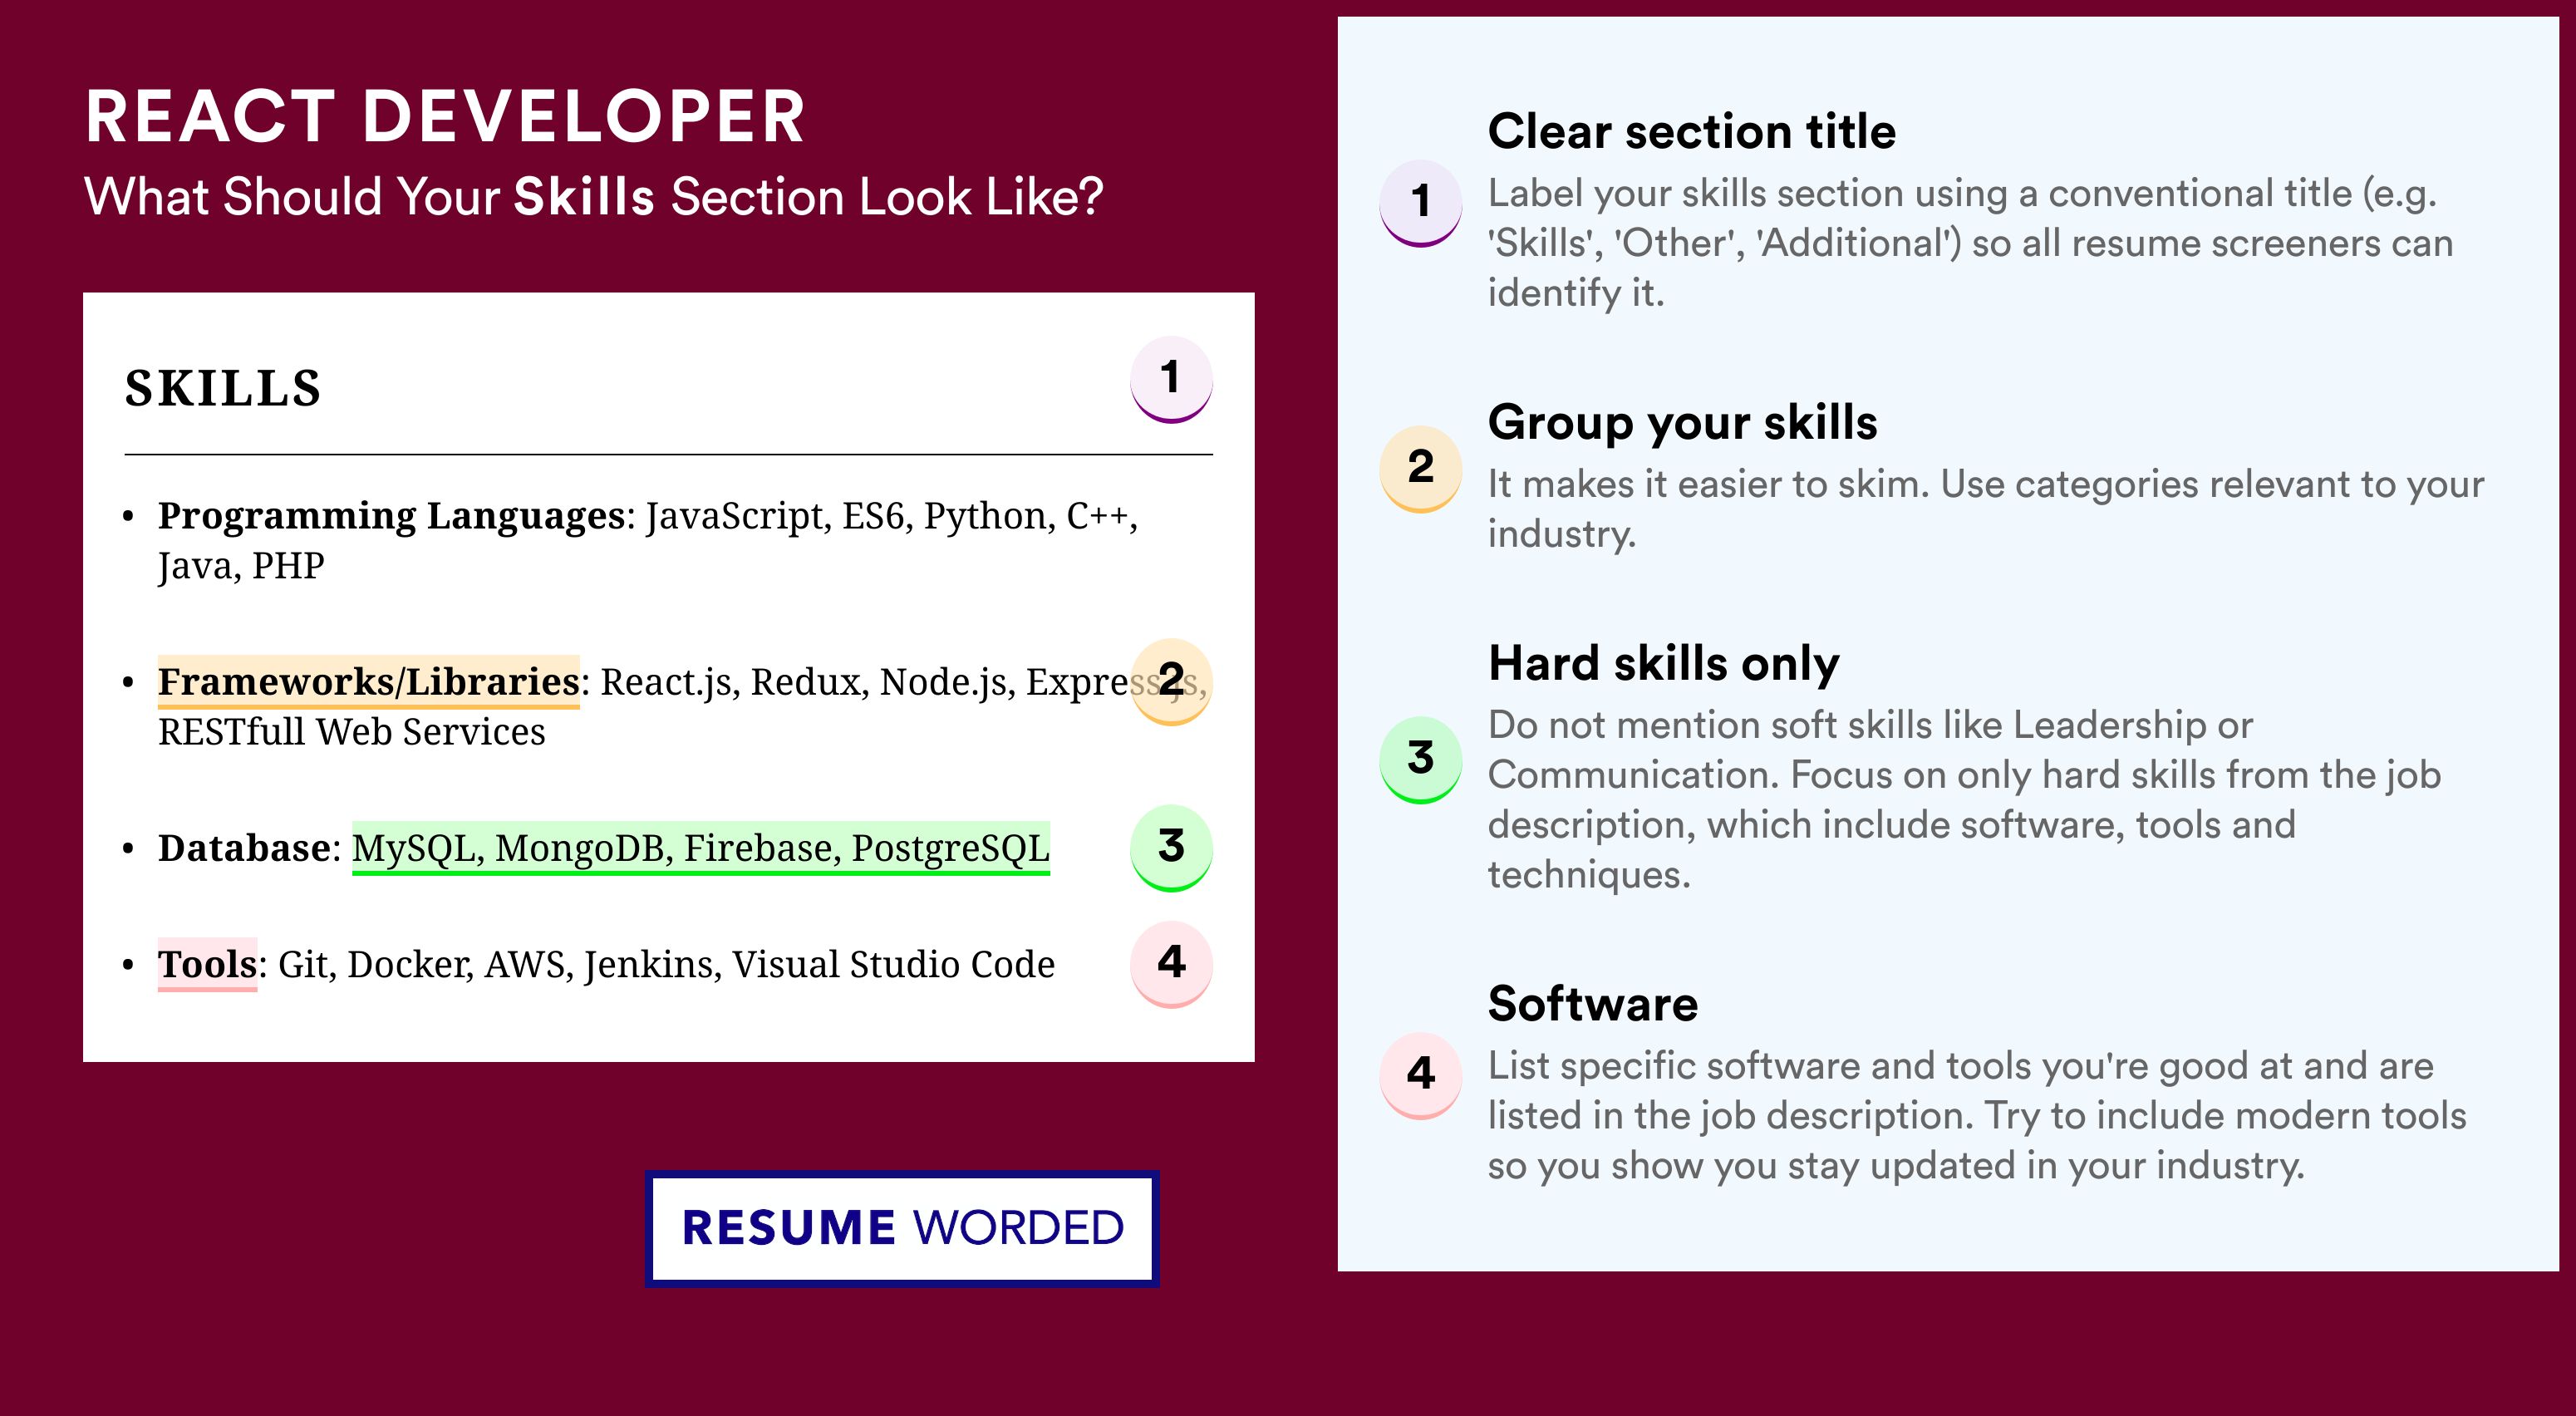 How To Write Your Skills Section - React Developer Roles